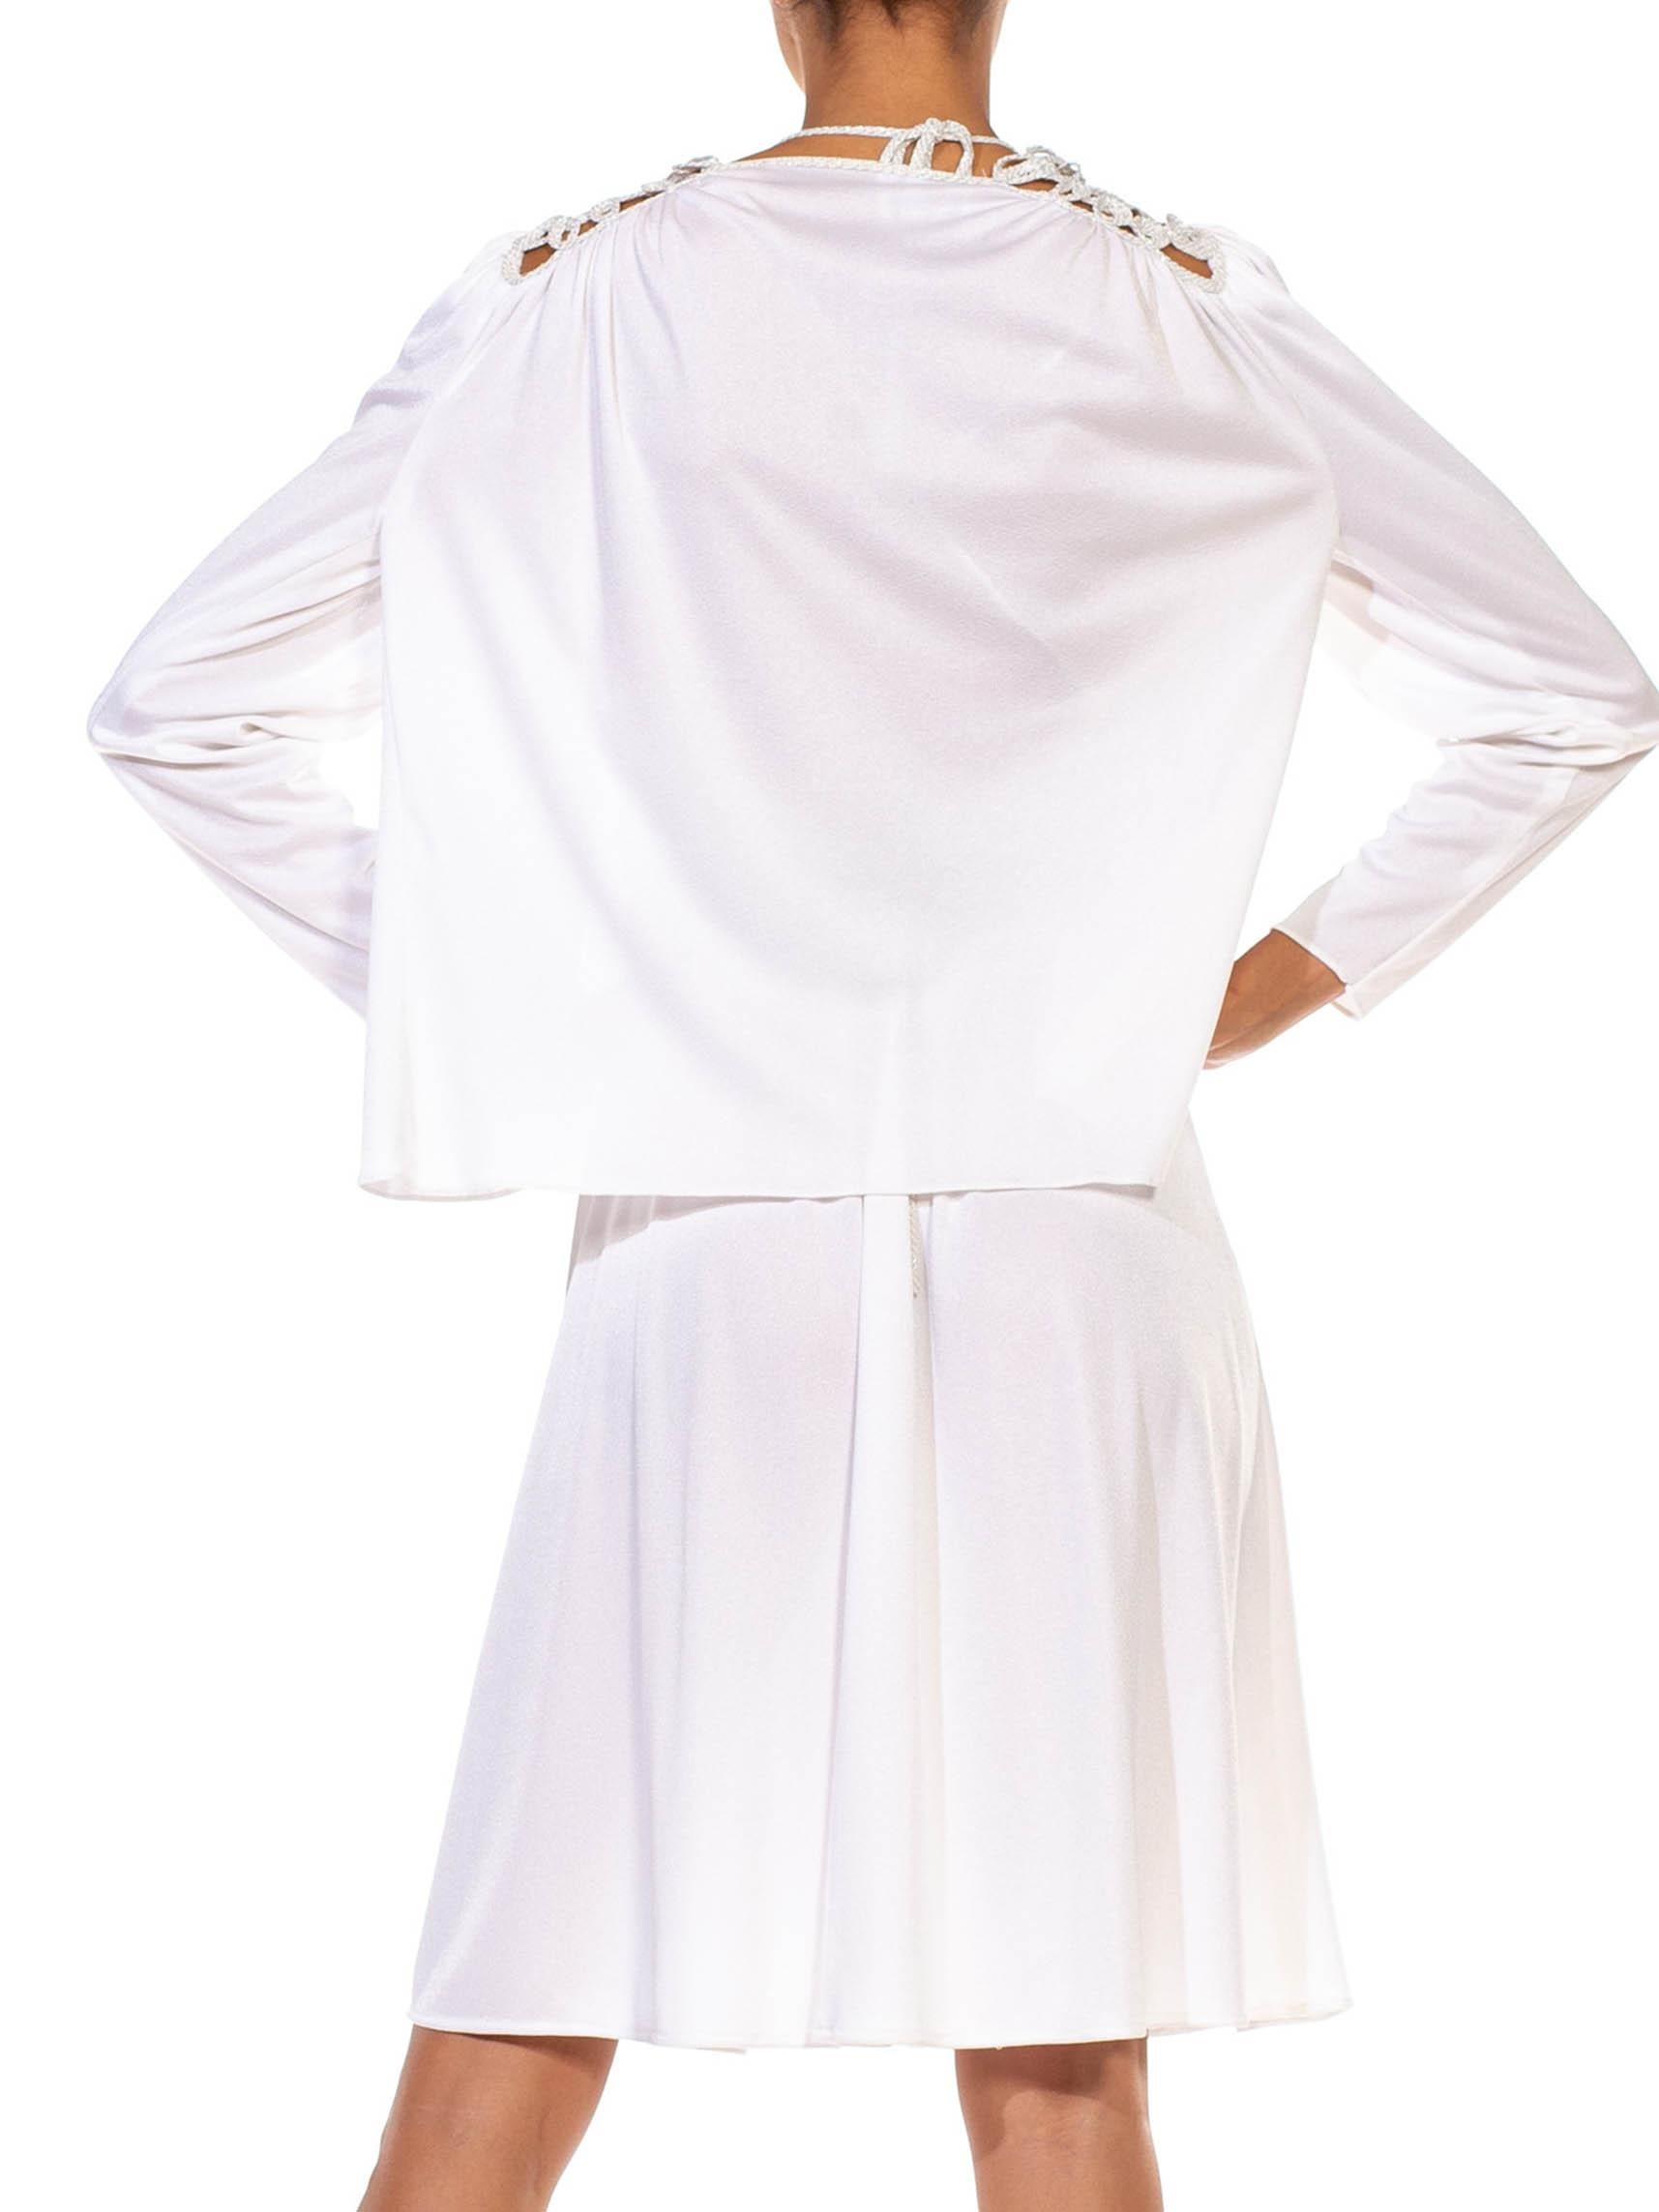 Women's 2000S White & Silver Trim  Jersey Cowl Backless Disco Dress With Jacket For Sale